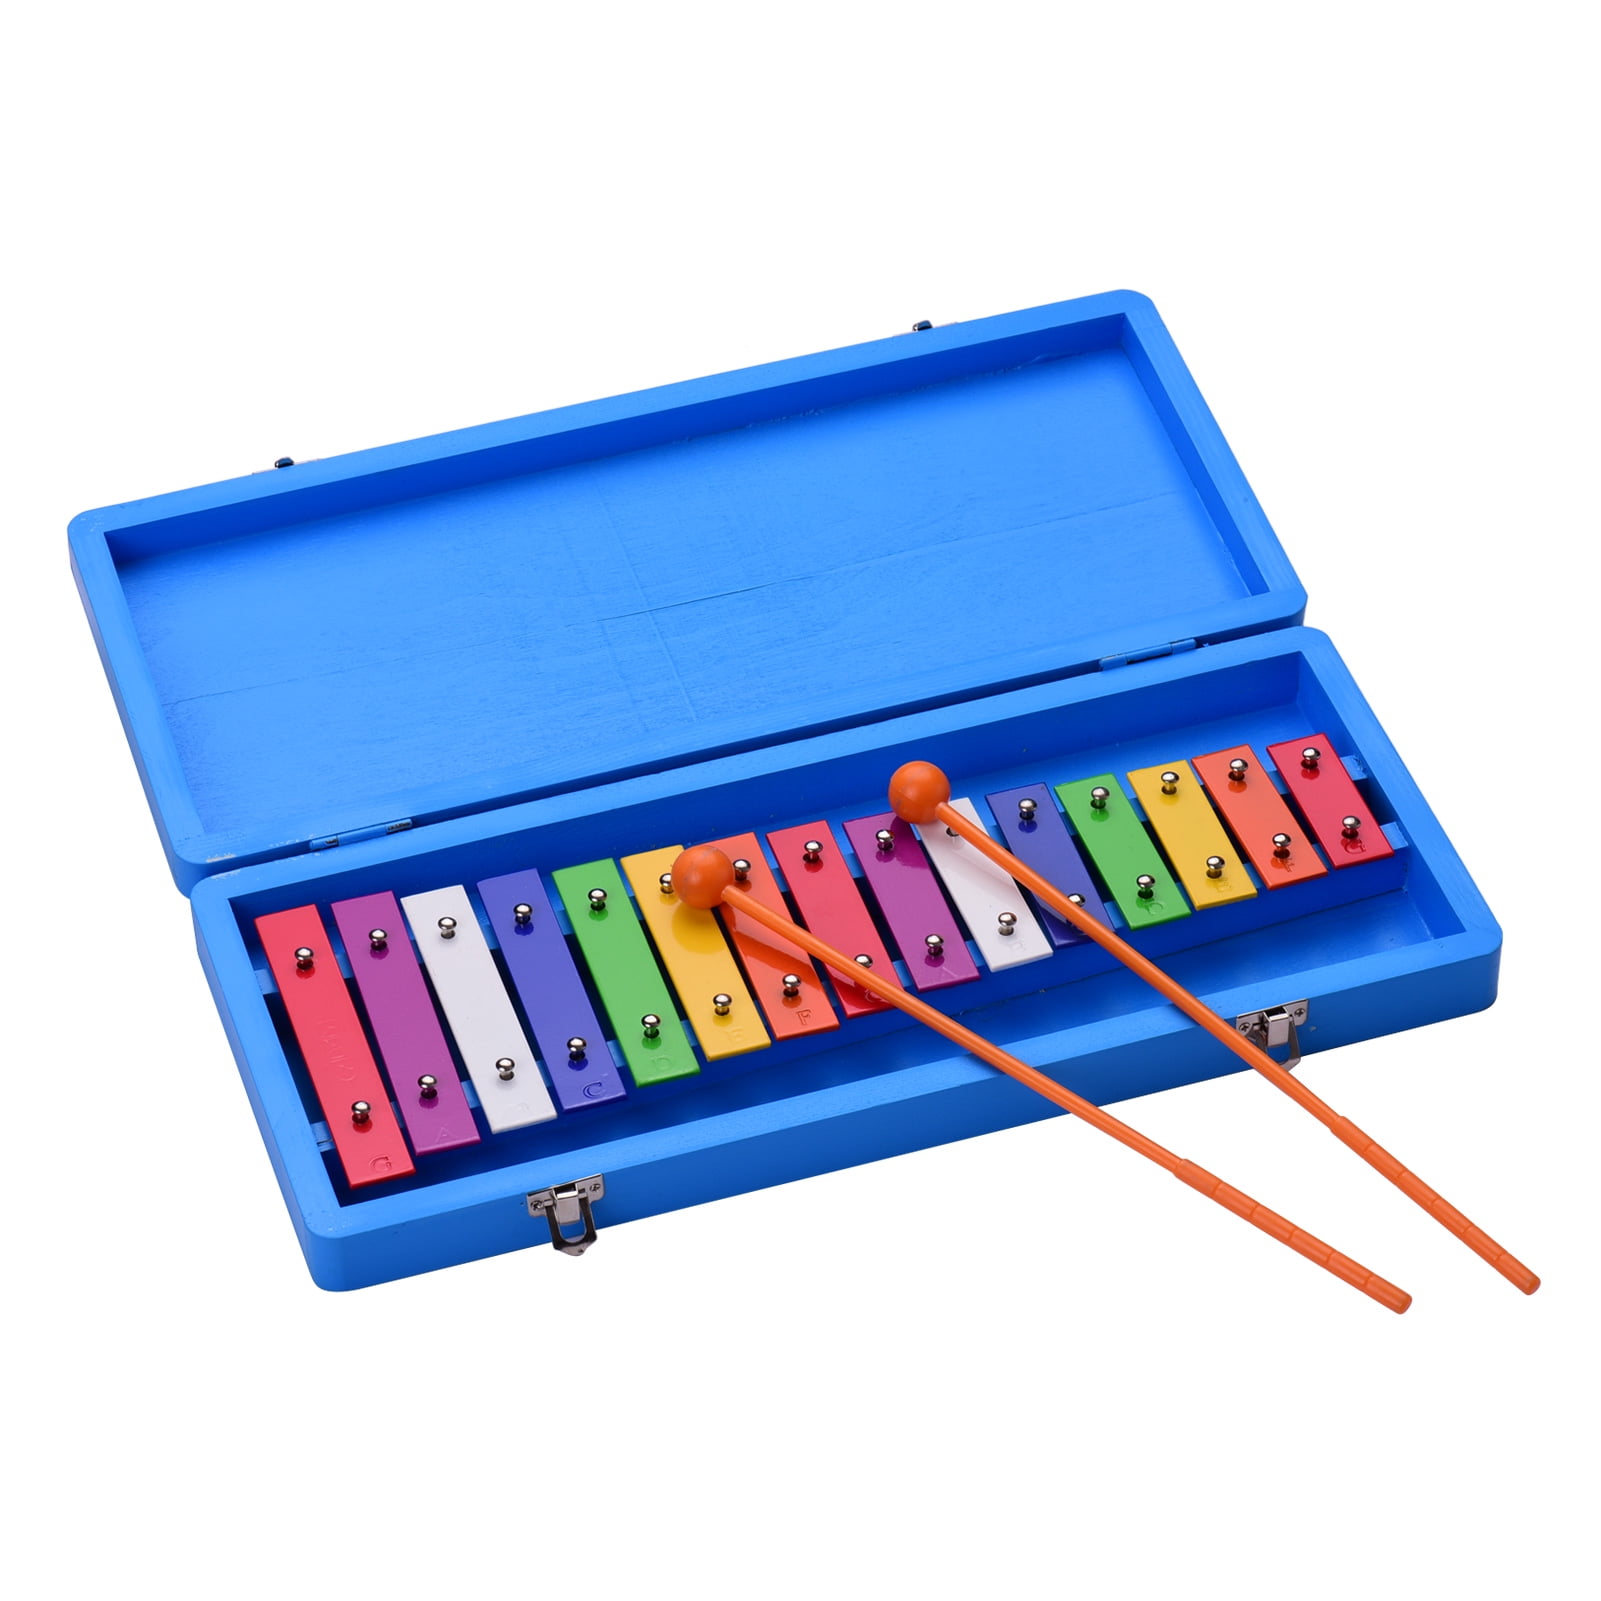 LOLYSIC 15 Tone Xylophone Glockenspiel Colorful Wooden Xylophone Xilofono Instrument with 2 Mallets for Beginner 